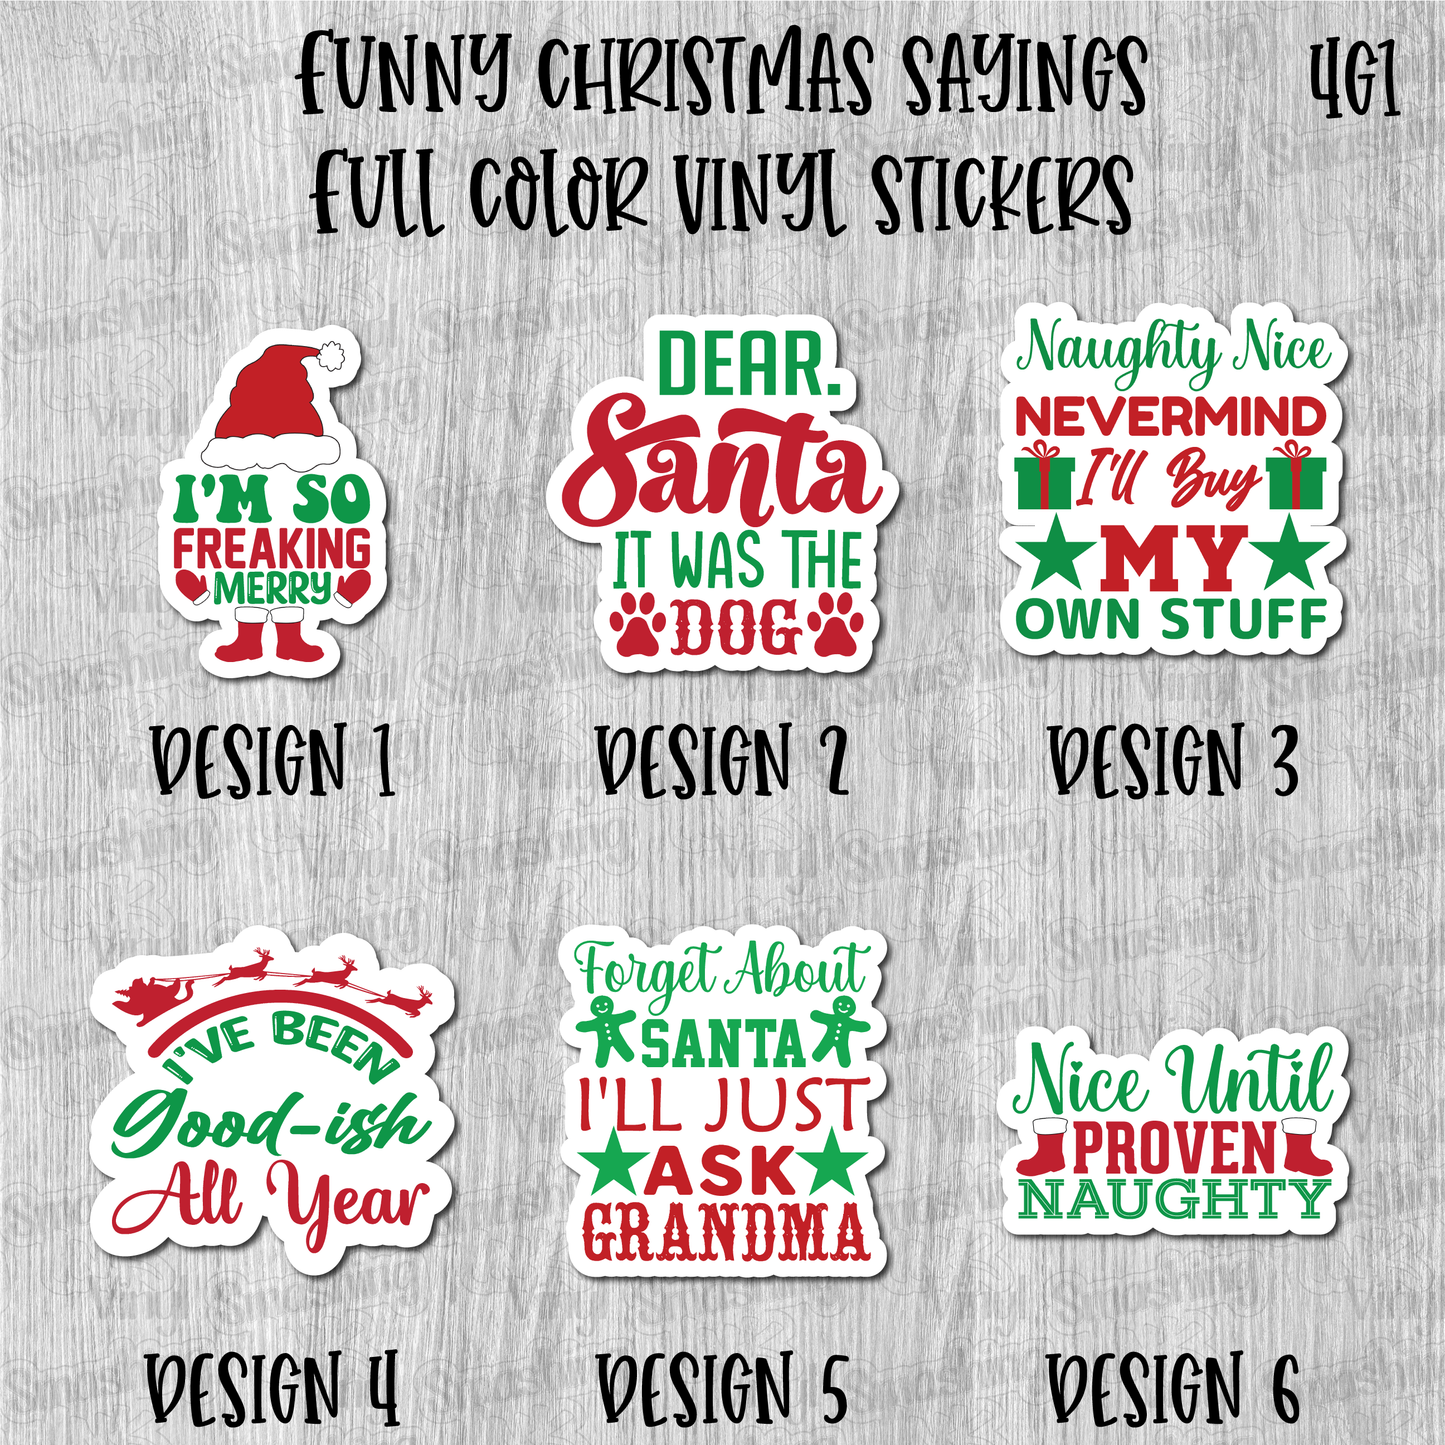 Funny Christmas Sayings - Full Color Vinyl Stickers (SHIPS IN 3-7 BUS DAYS)